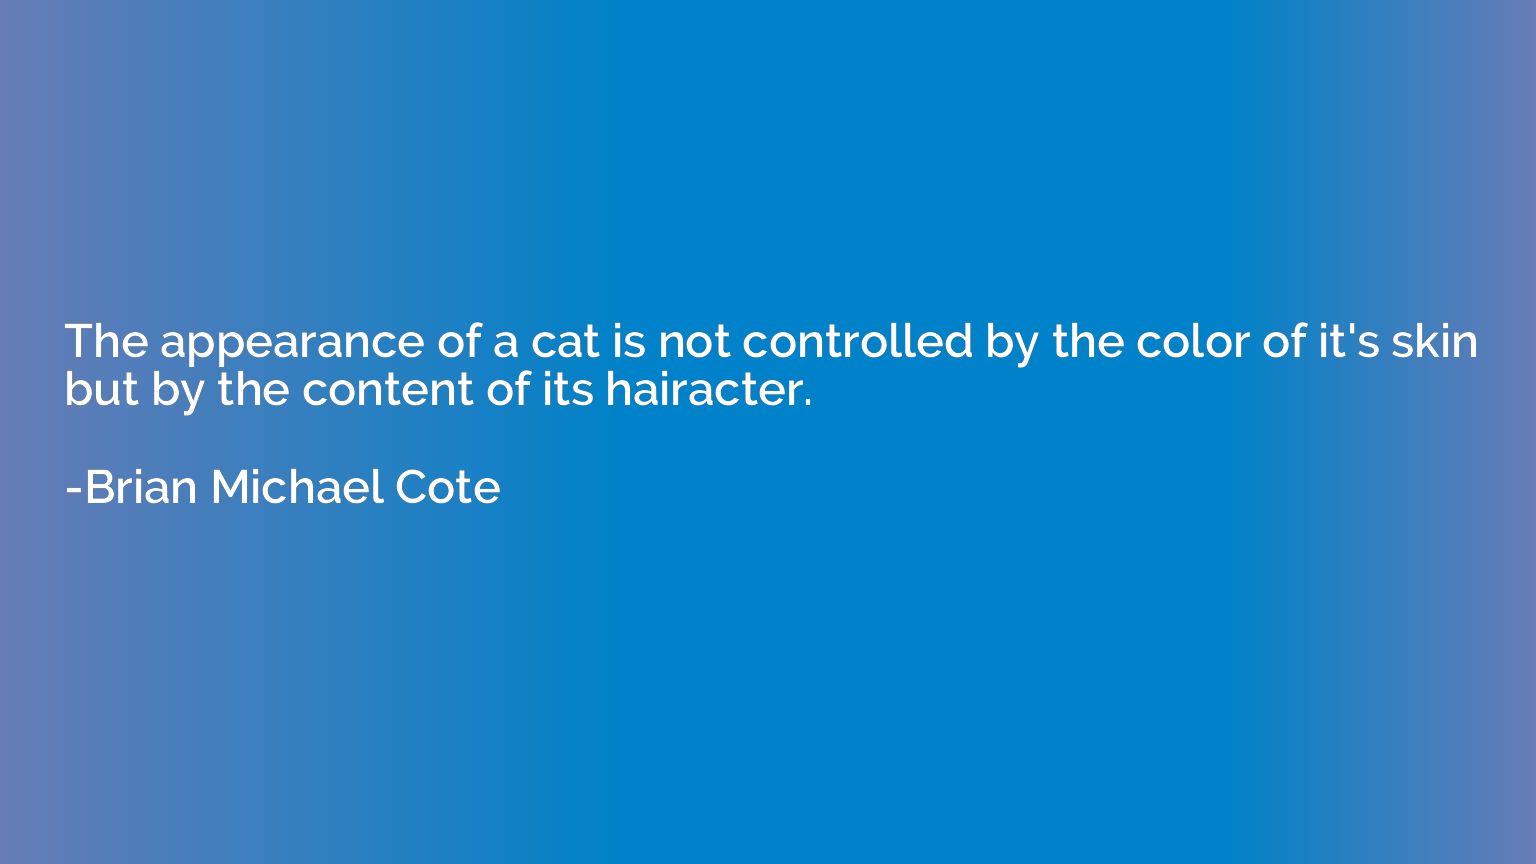 The appearance of a cat is not controlled by the color of it